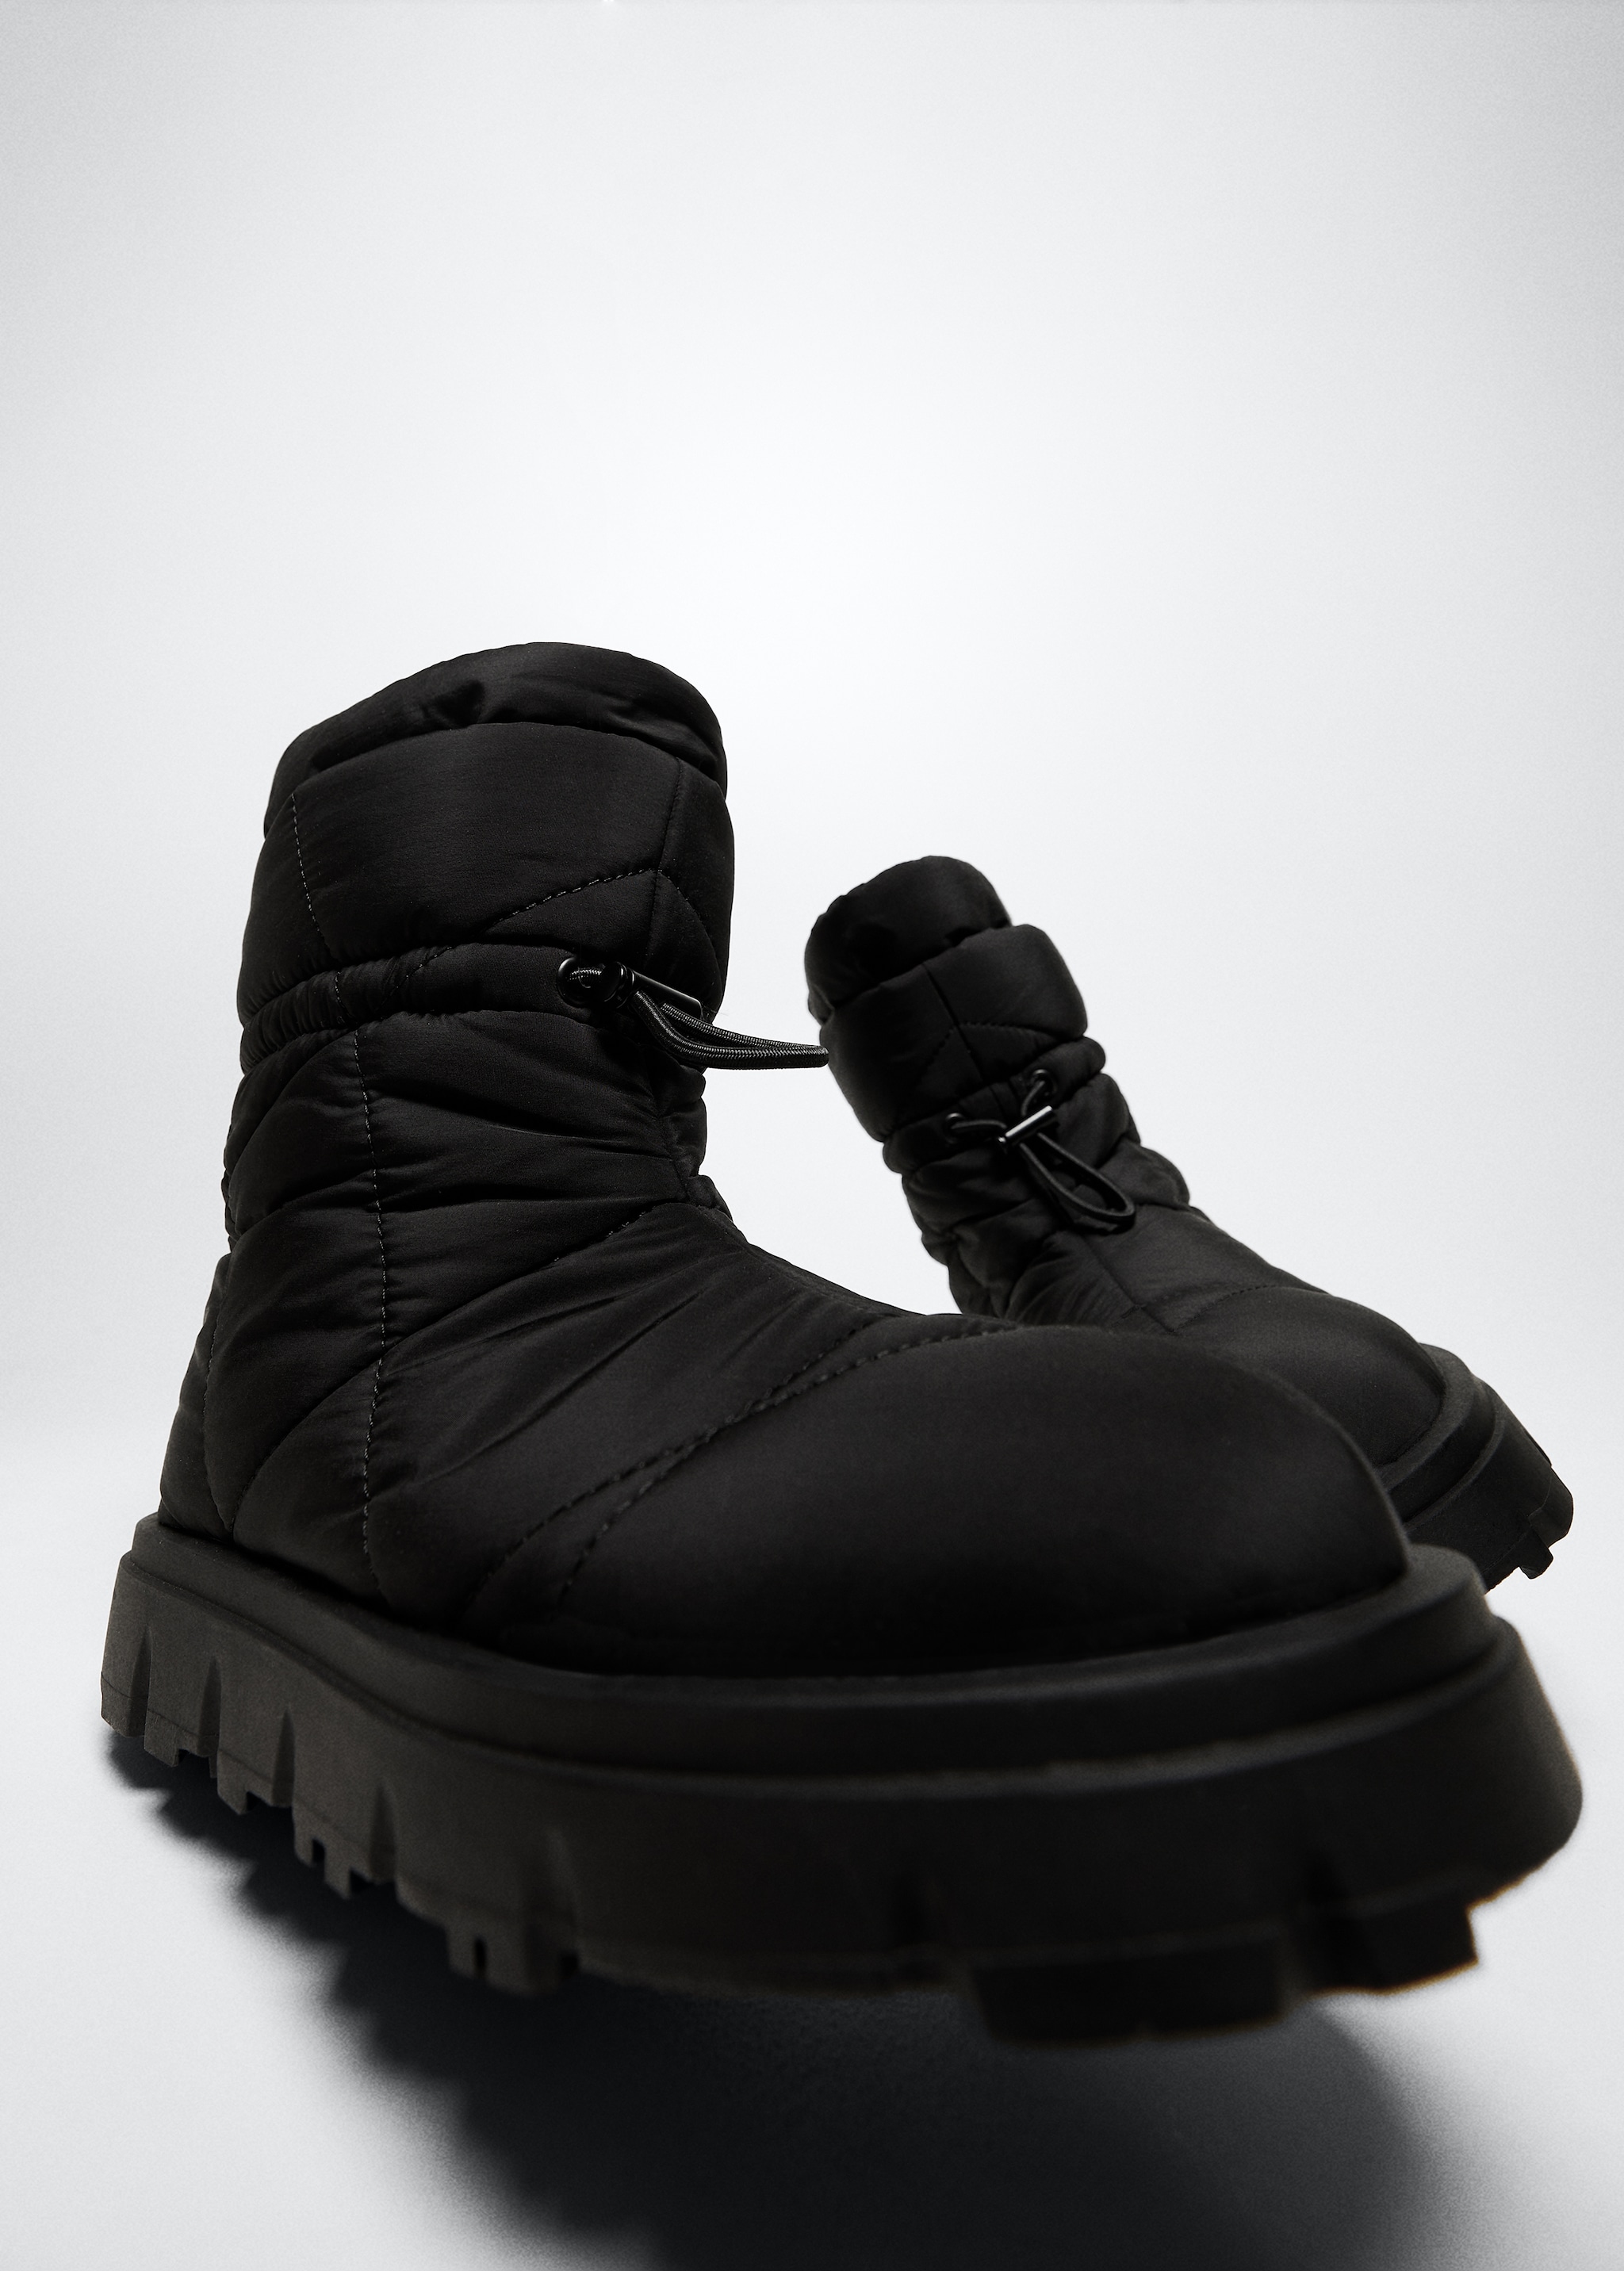 Padded boot with track sole - Details of the article 5